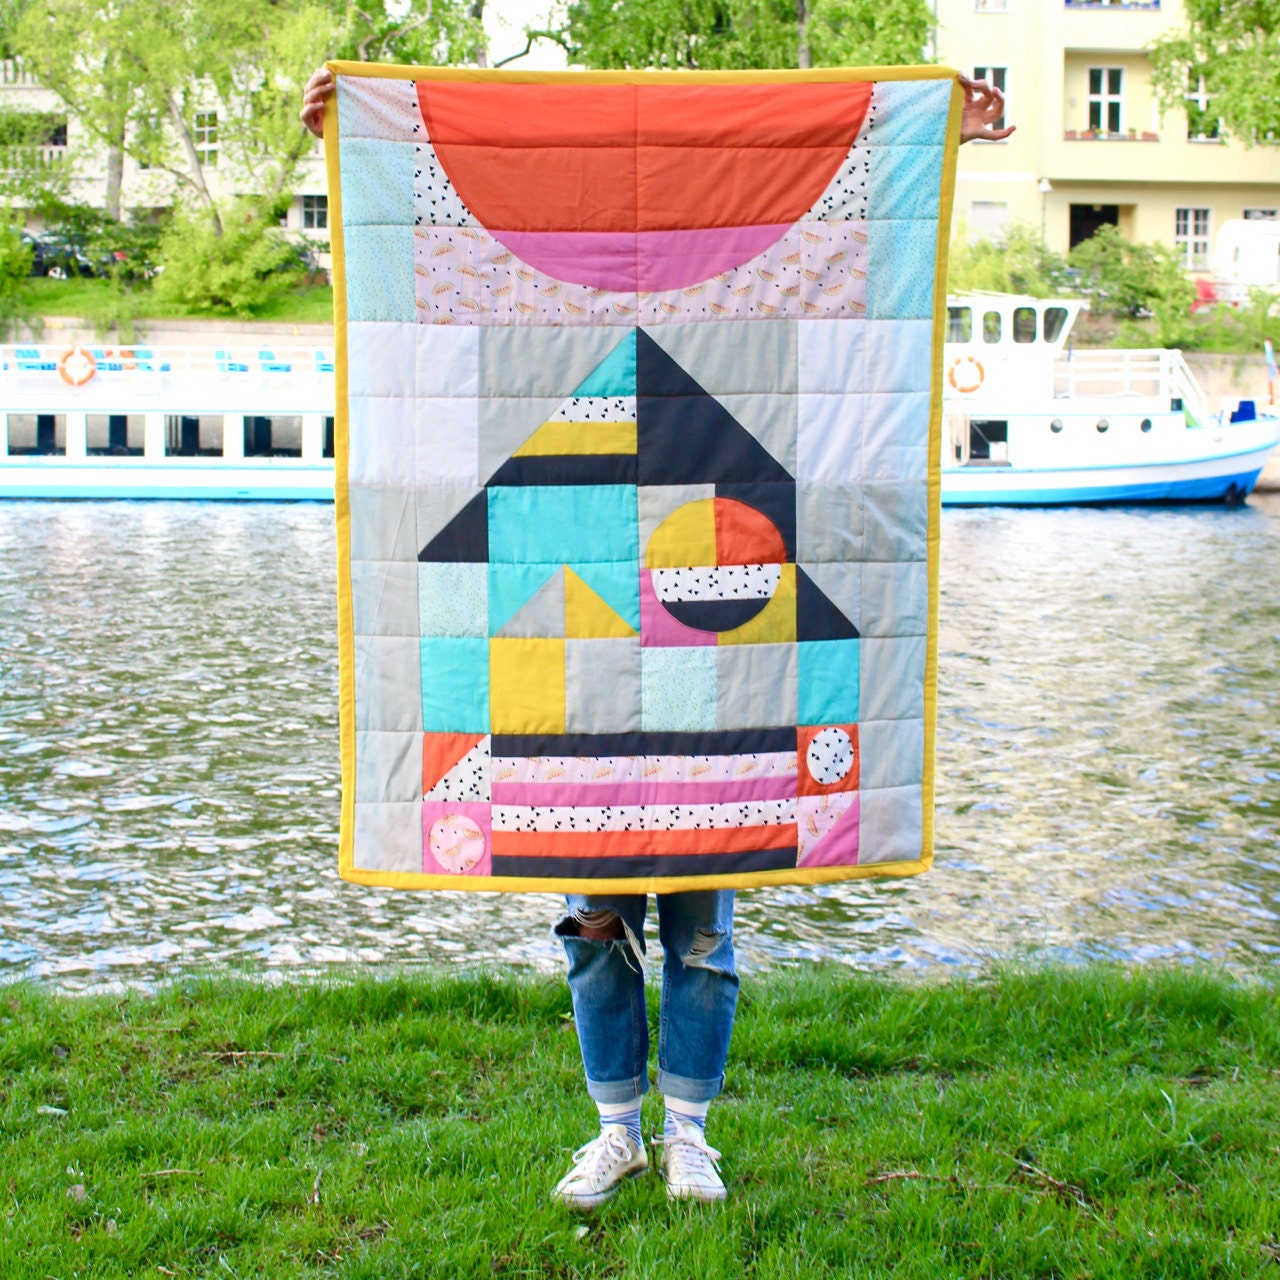 Quilt by Karolin Reichardt / Boat and Balloon